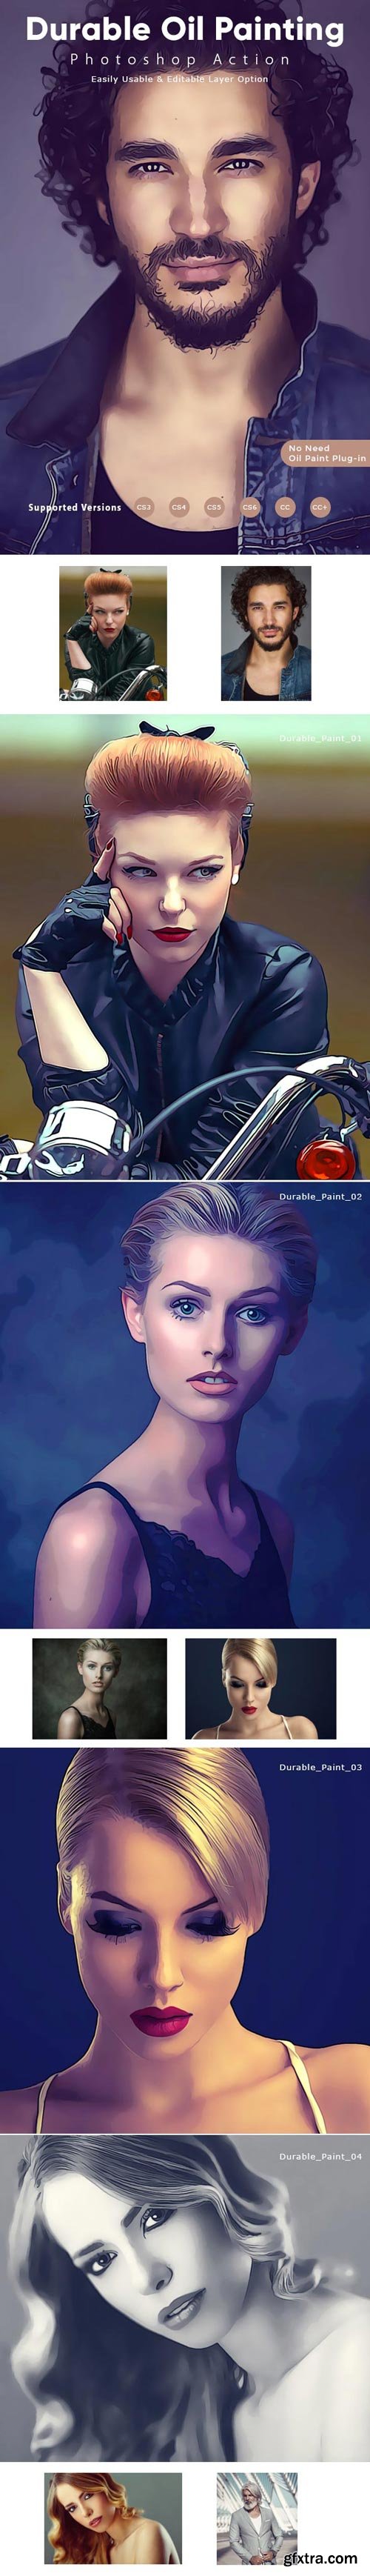 GraphicRiver - Durable Oil Painting Action - 22102220